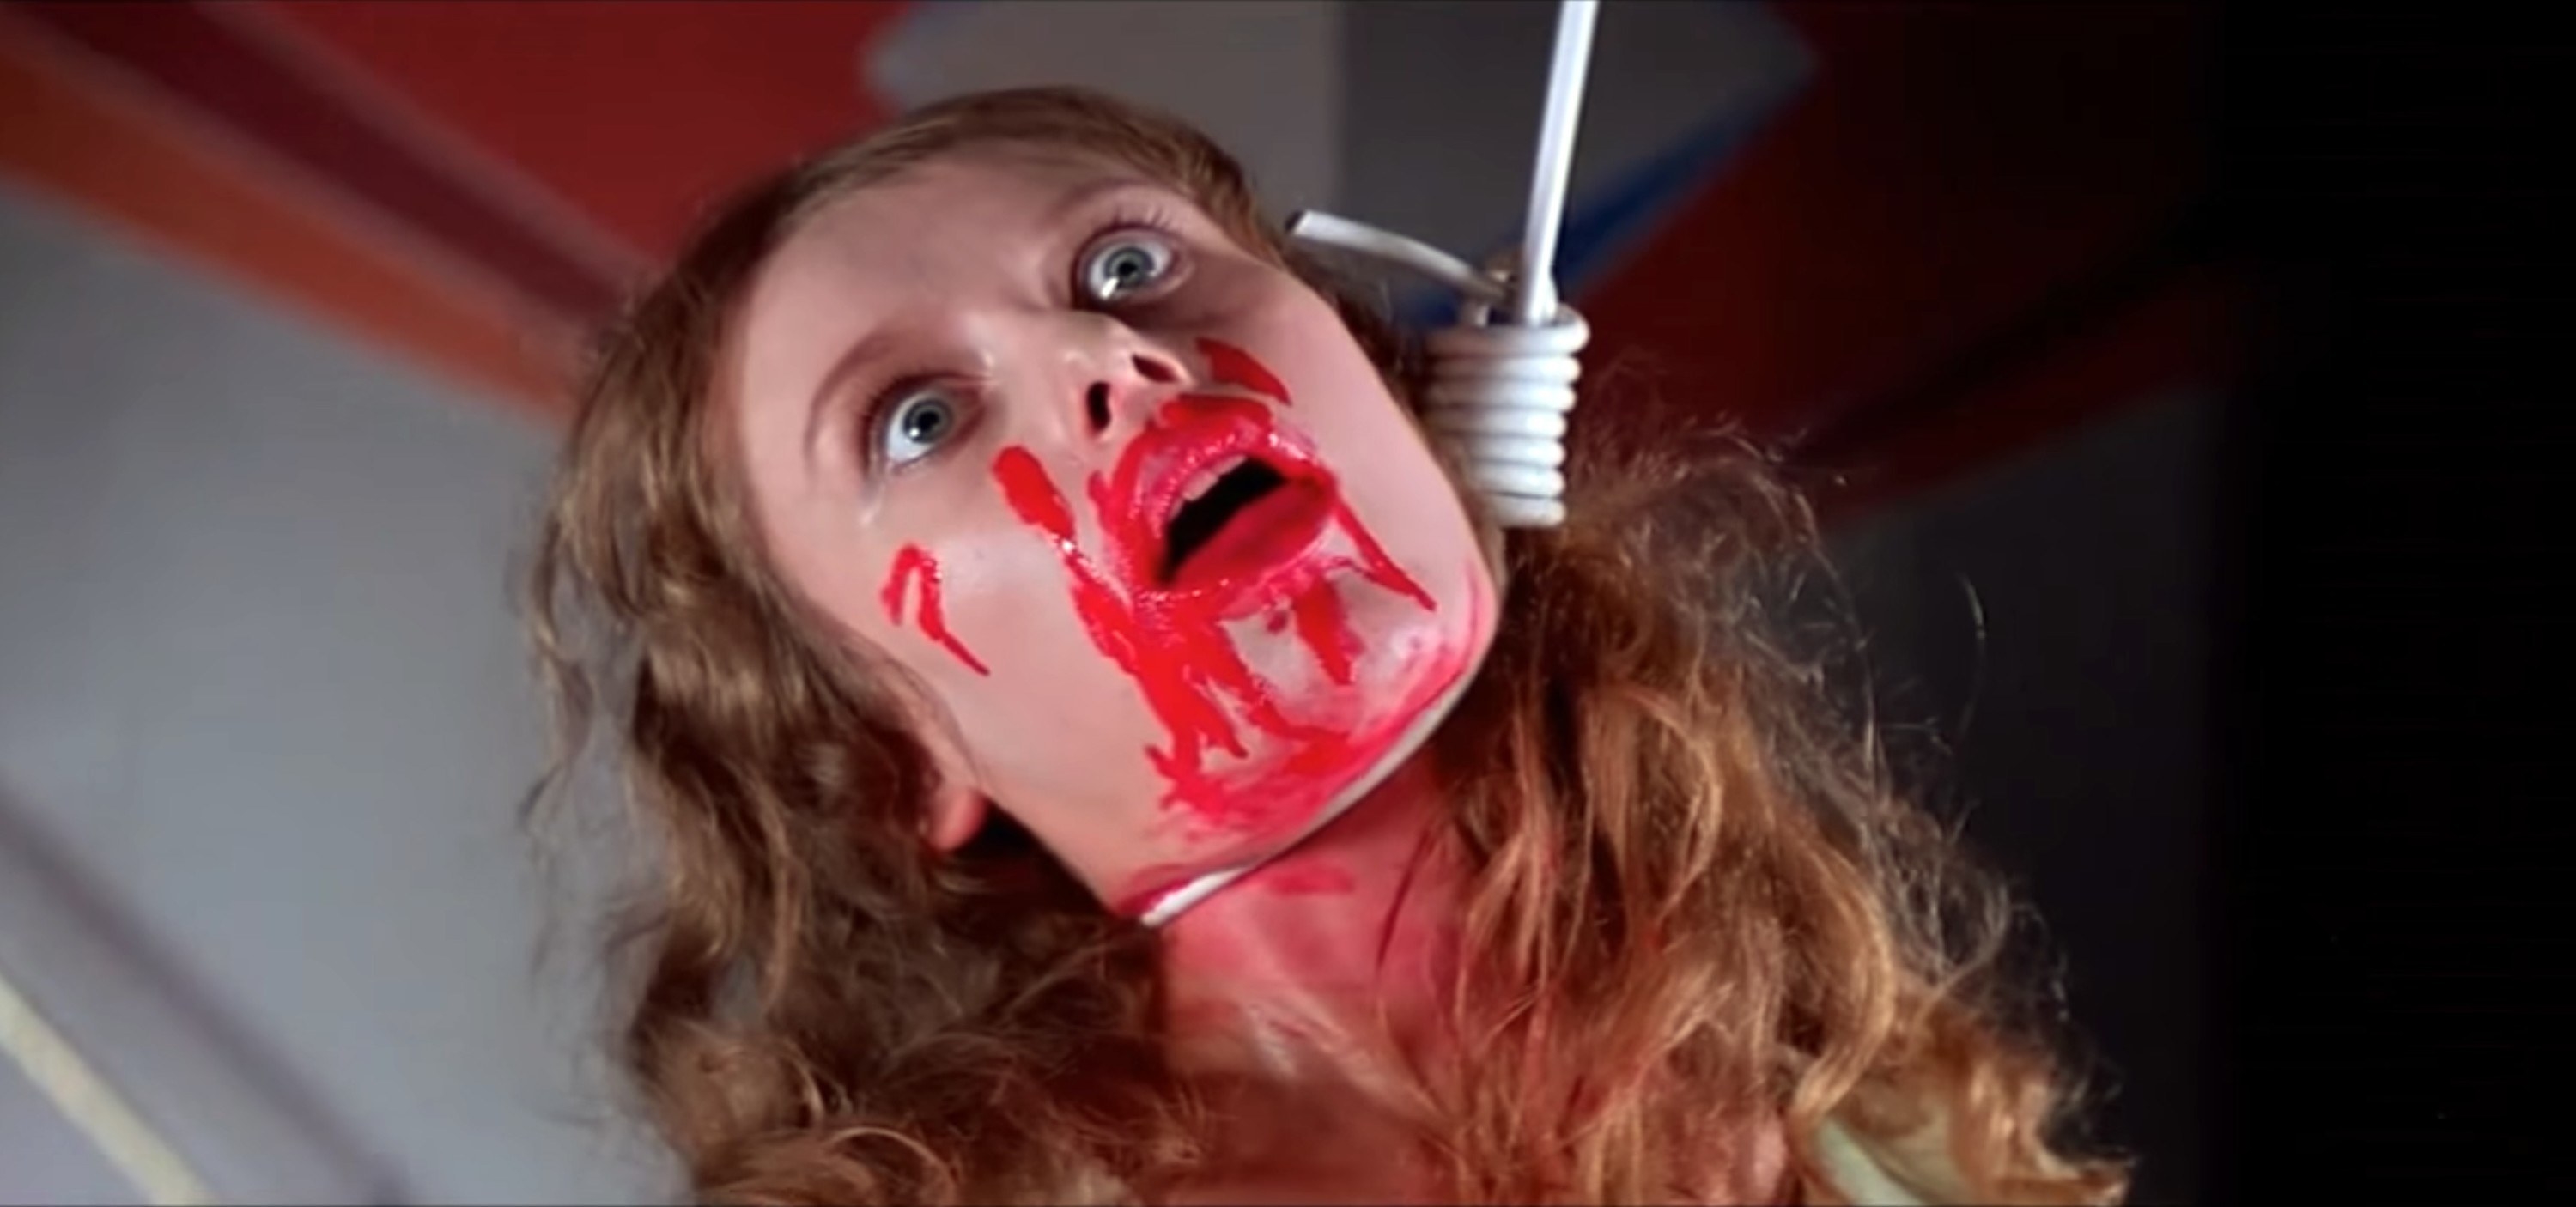 Eva Axen hangs with fake blood on her face